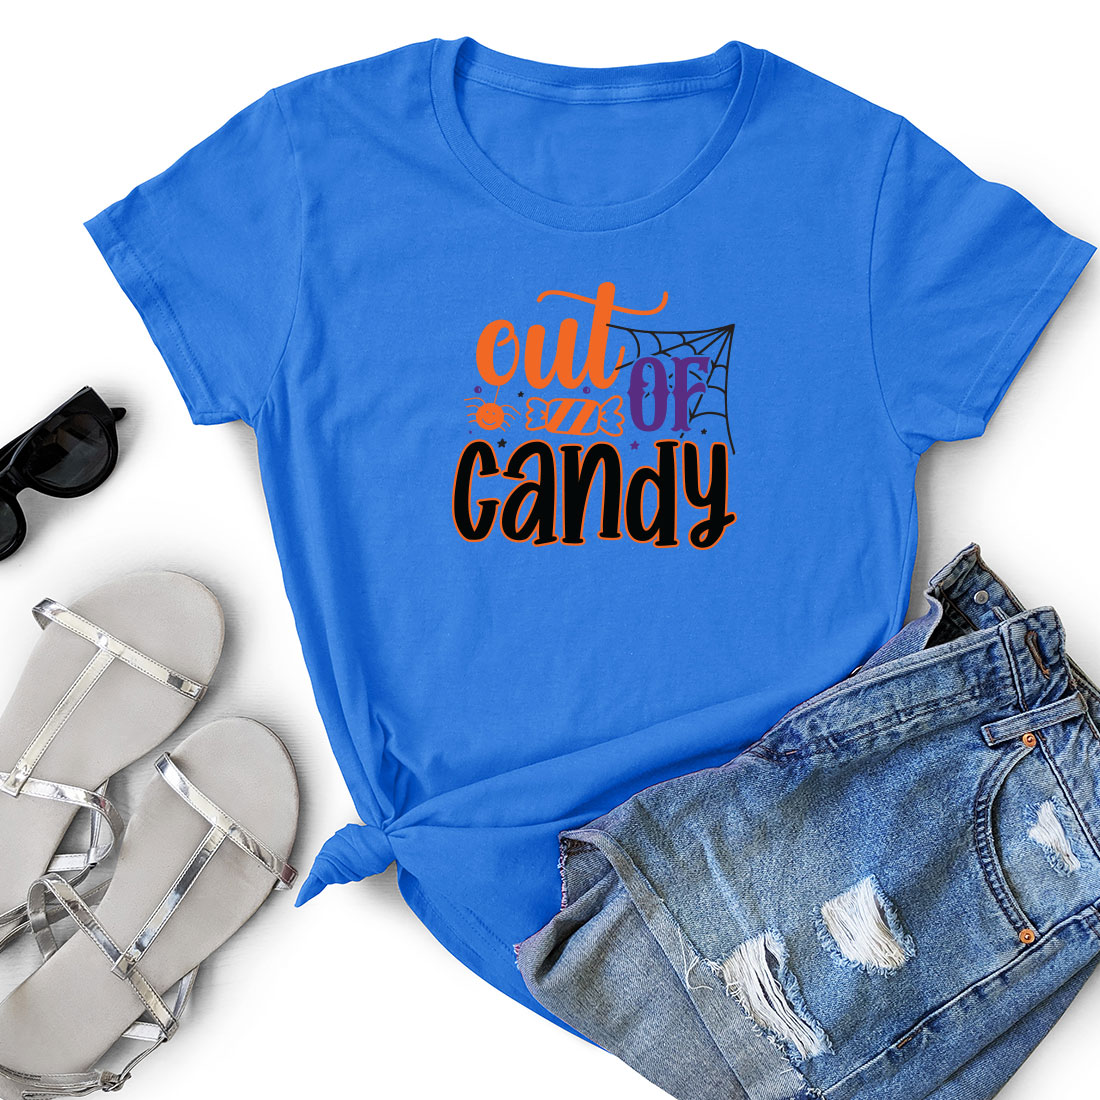 T - shirt that says cut the candy on it.